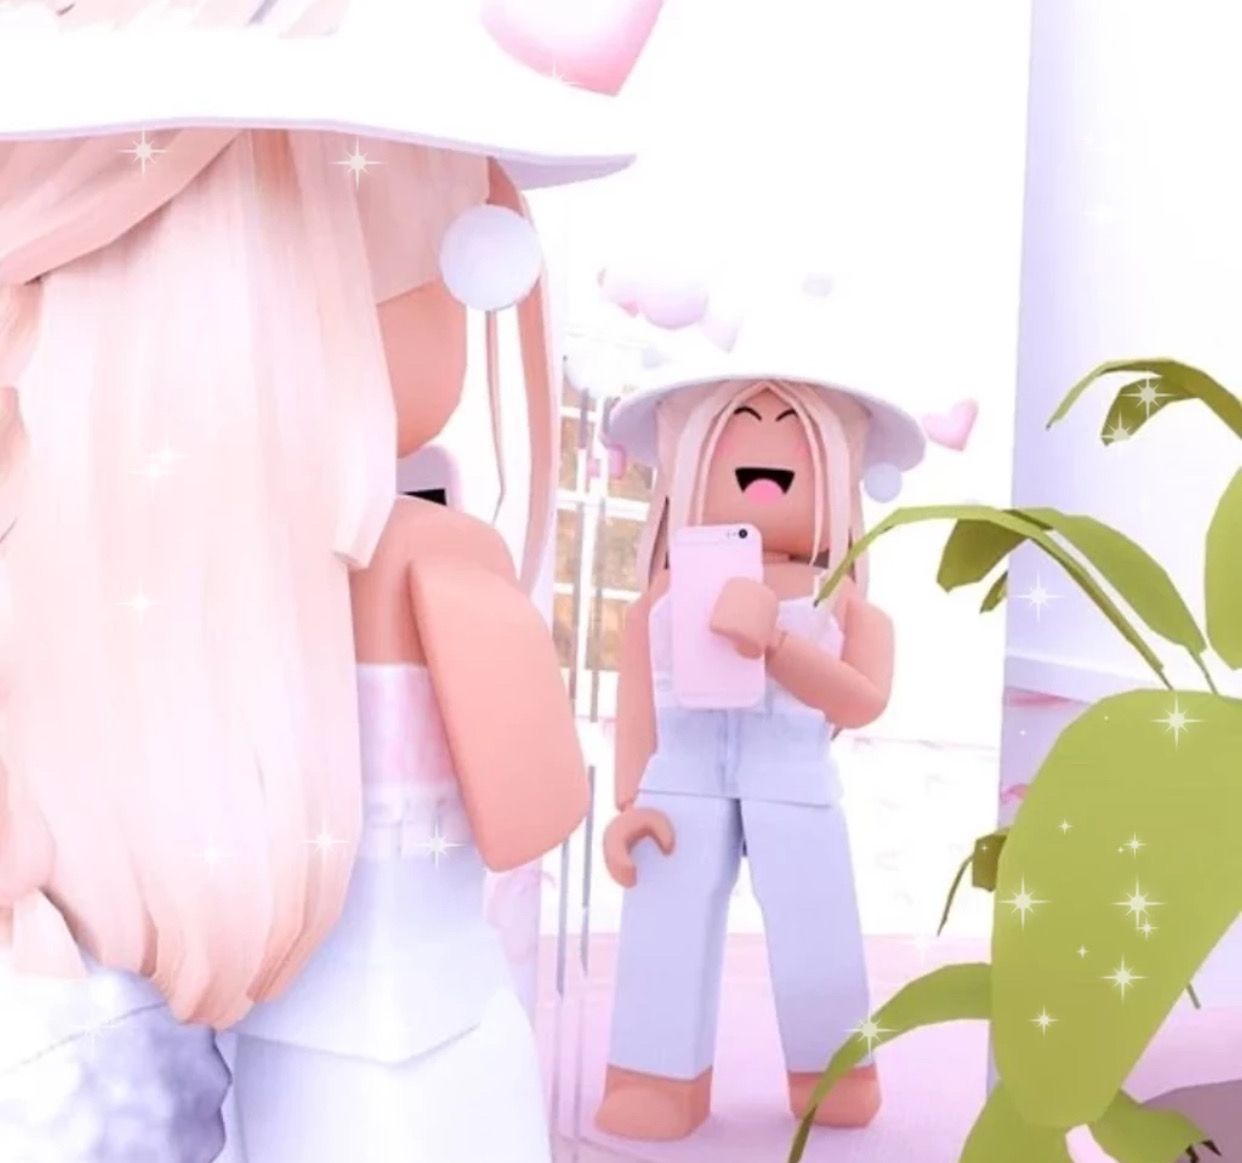 Aesthetic roblox. Roblox animation, Roblox picture, Cute tumblr wallpaper